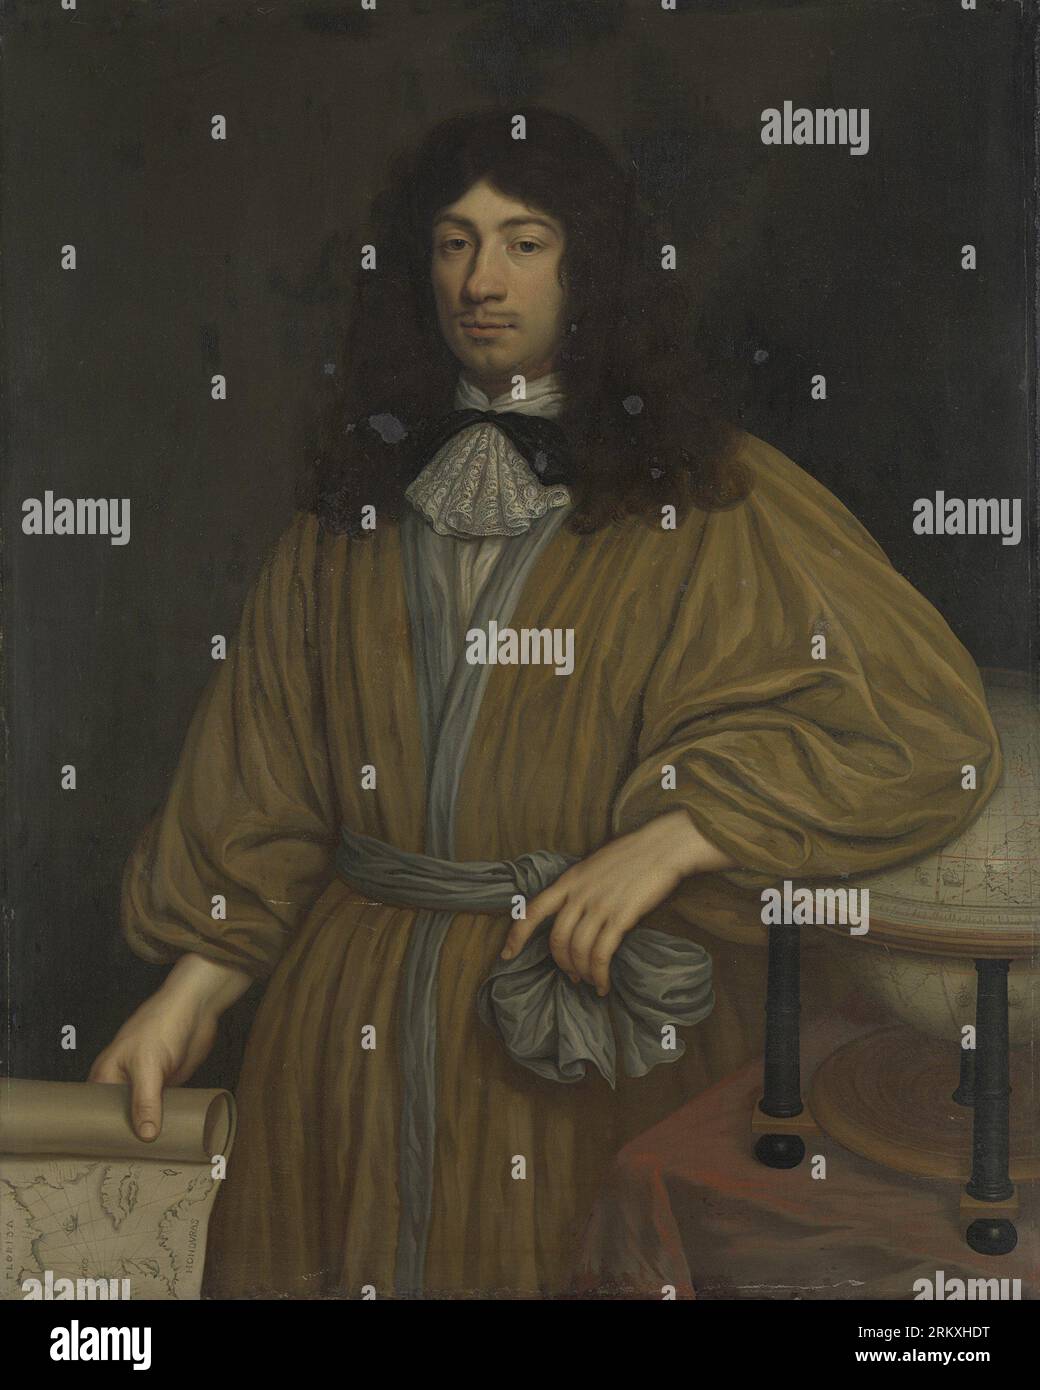 Jan Boudaen Courten (1635-1716), lord of St Laurens, Schellach and Popkensburg. Councillor of Middelburg and director of the Dutch East India Caompany 1668 by Cornelius Janson van Ceulen the Younger Stock Photo